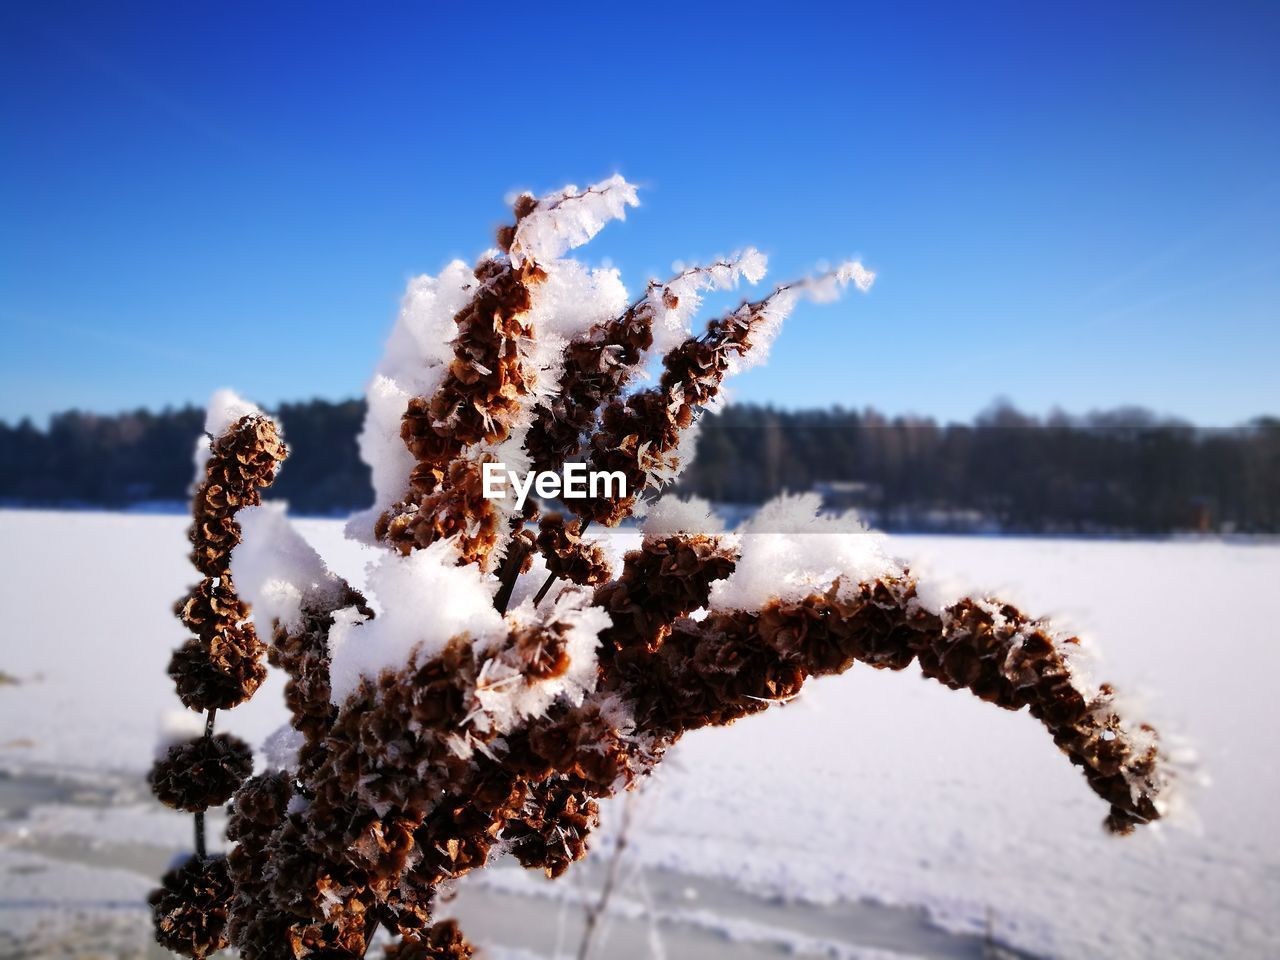 CLOSE-UP OF FROZEN PLANT ON SNOW COVERED LAND